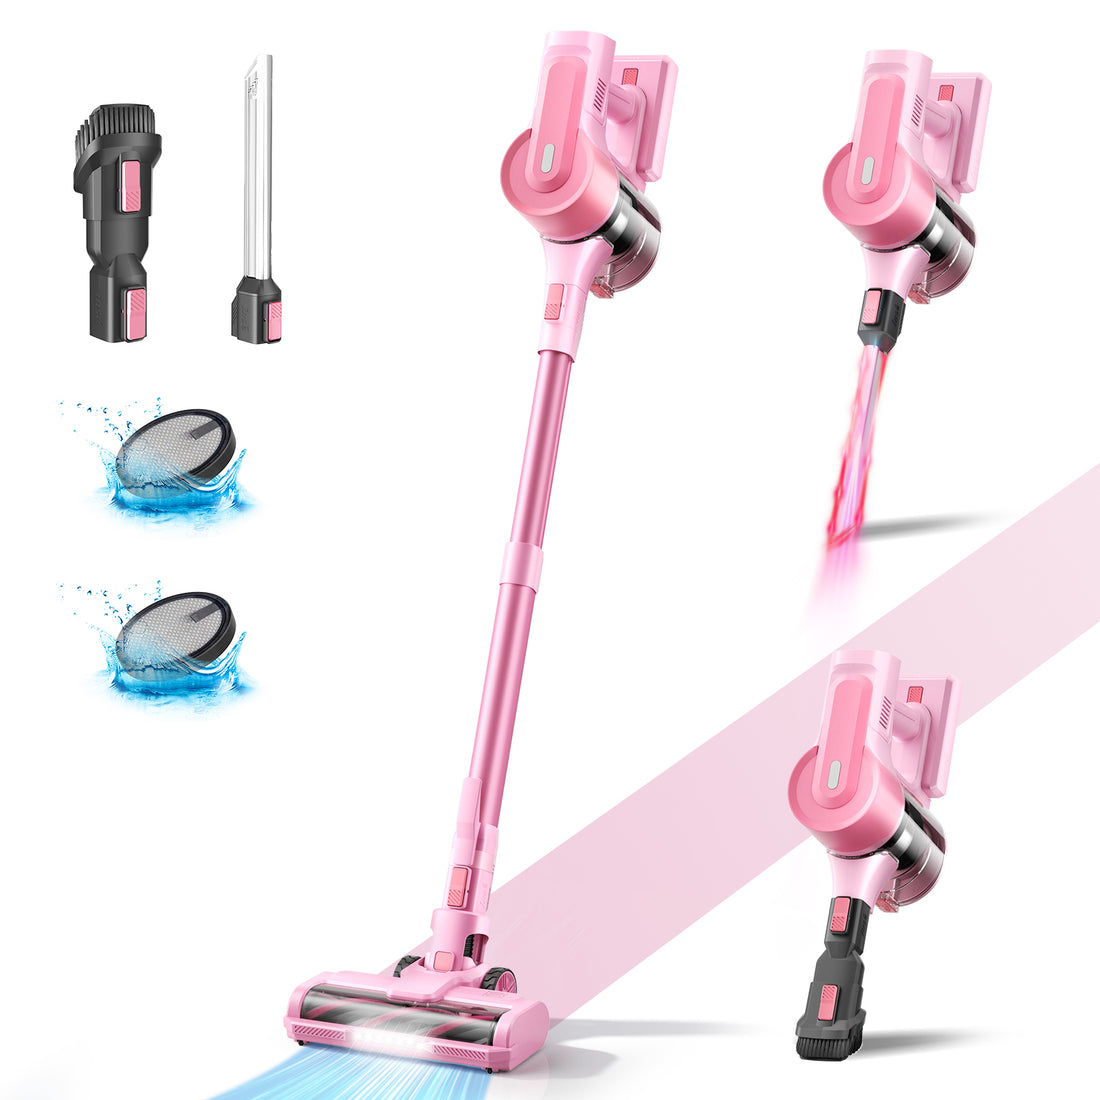 S11 Pro Cordless Vacuum Cleaner, with 30Kpa 350W Suction, Max 50 Min Runtime for Hard Floor Pet Hair